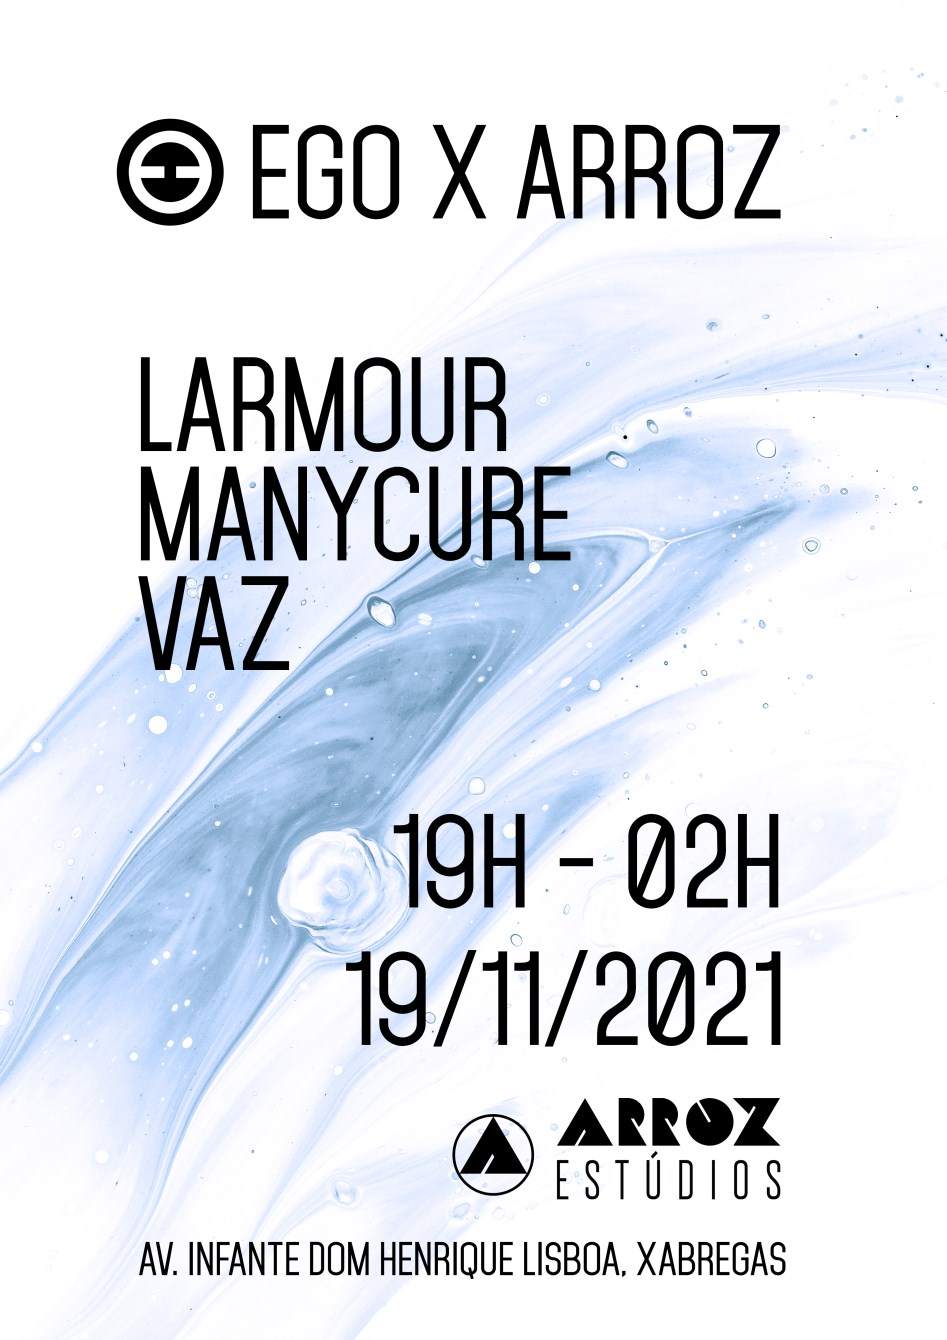 EGO x Arroz with Larmour, Vaz & Manycure - フライヤー表